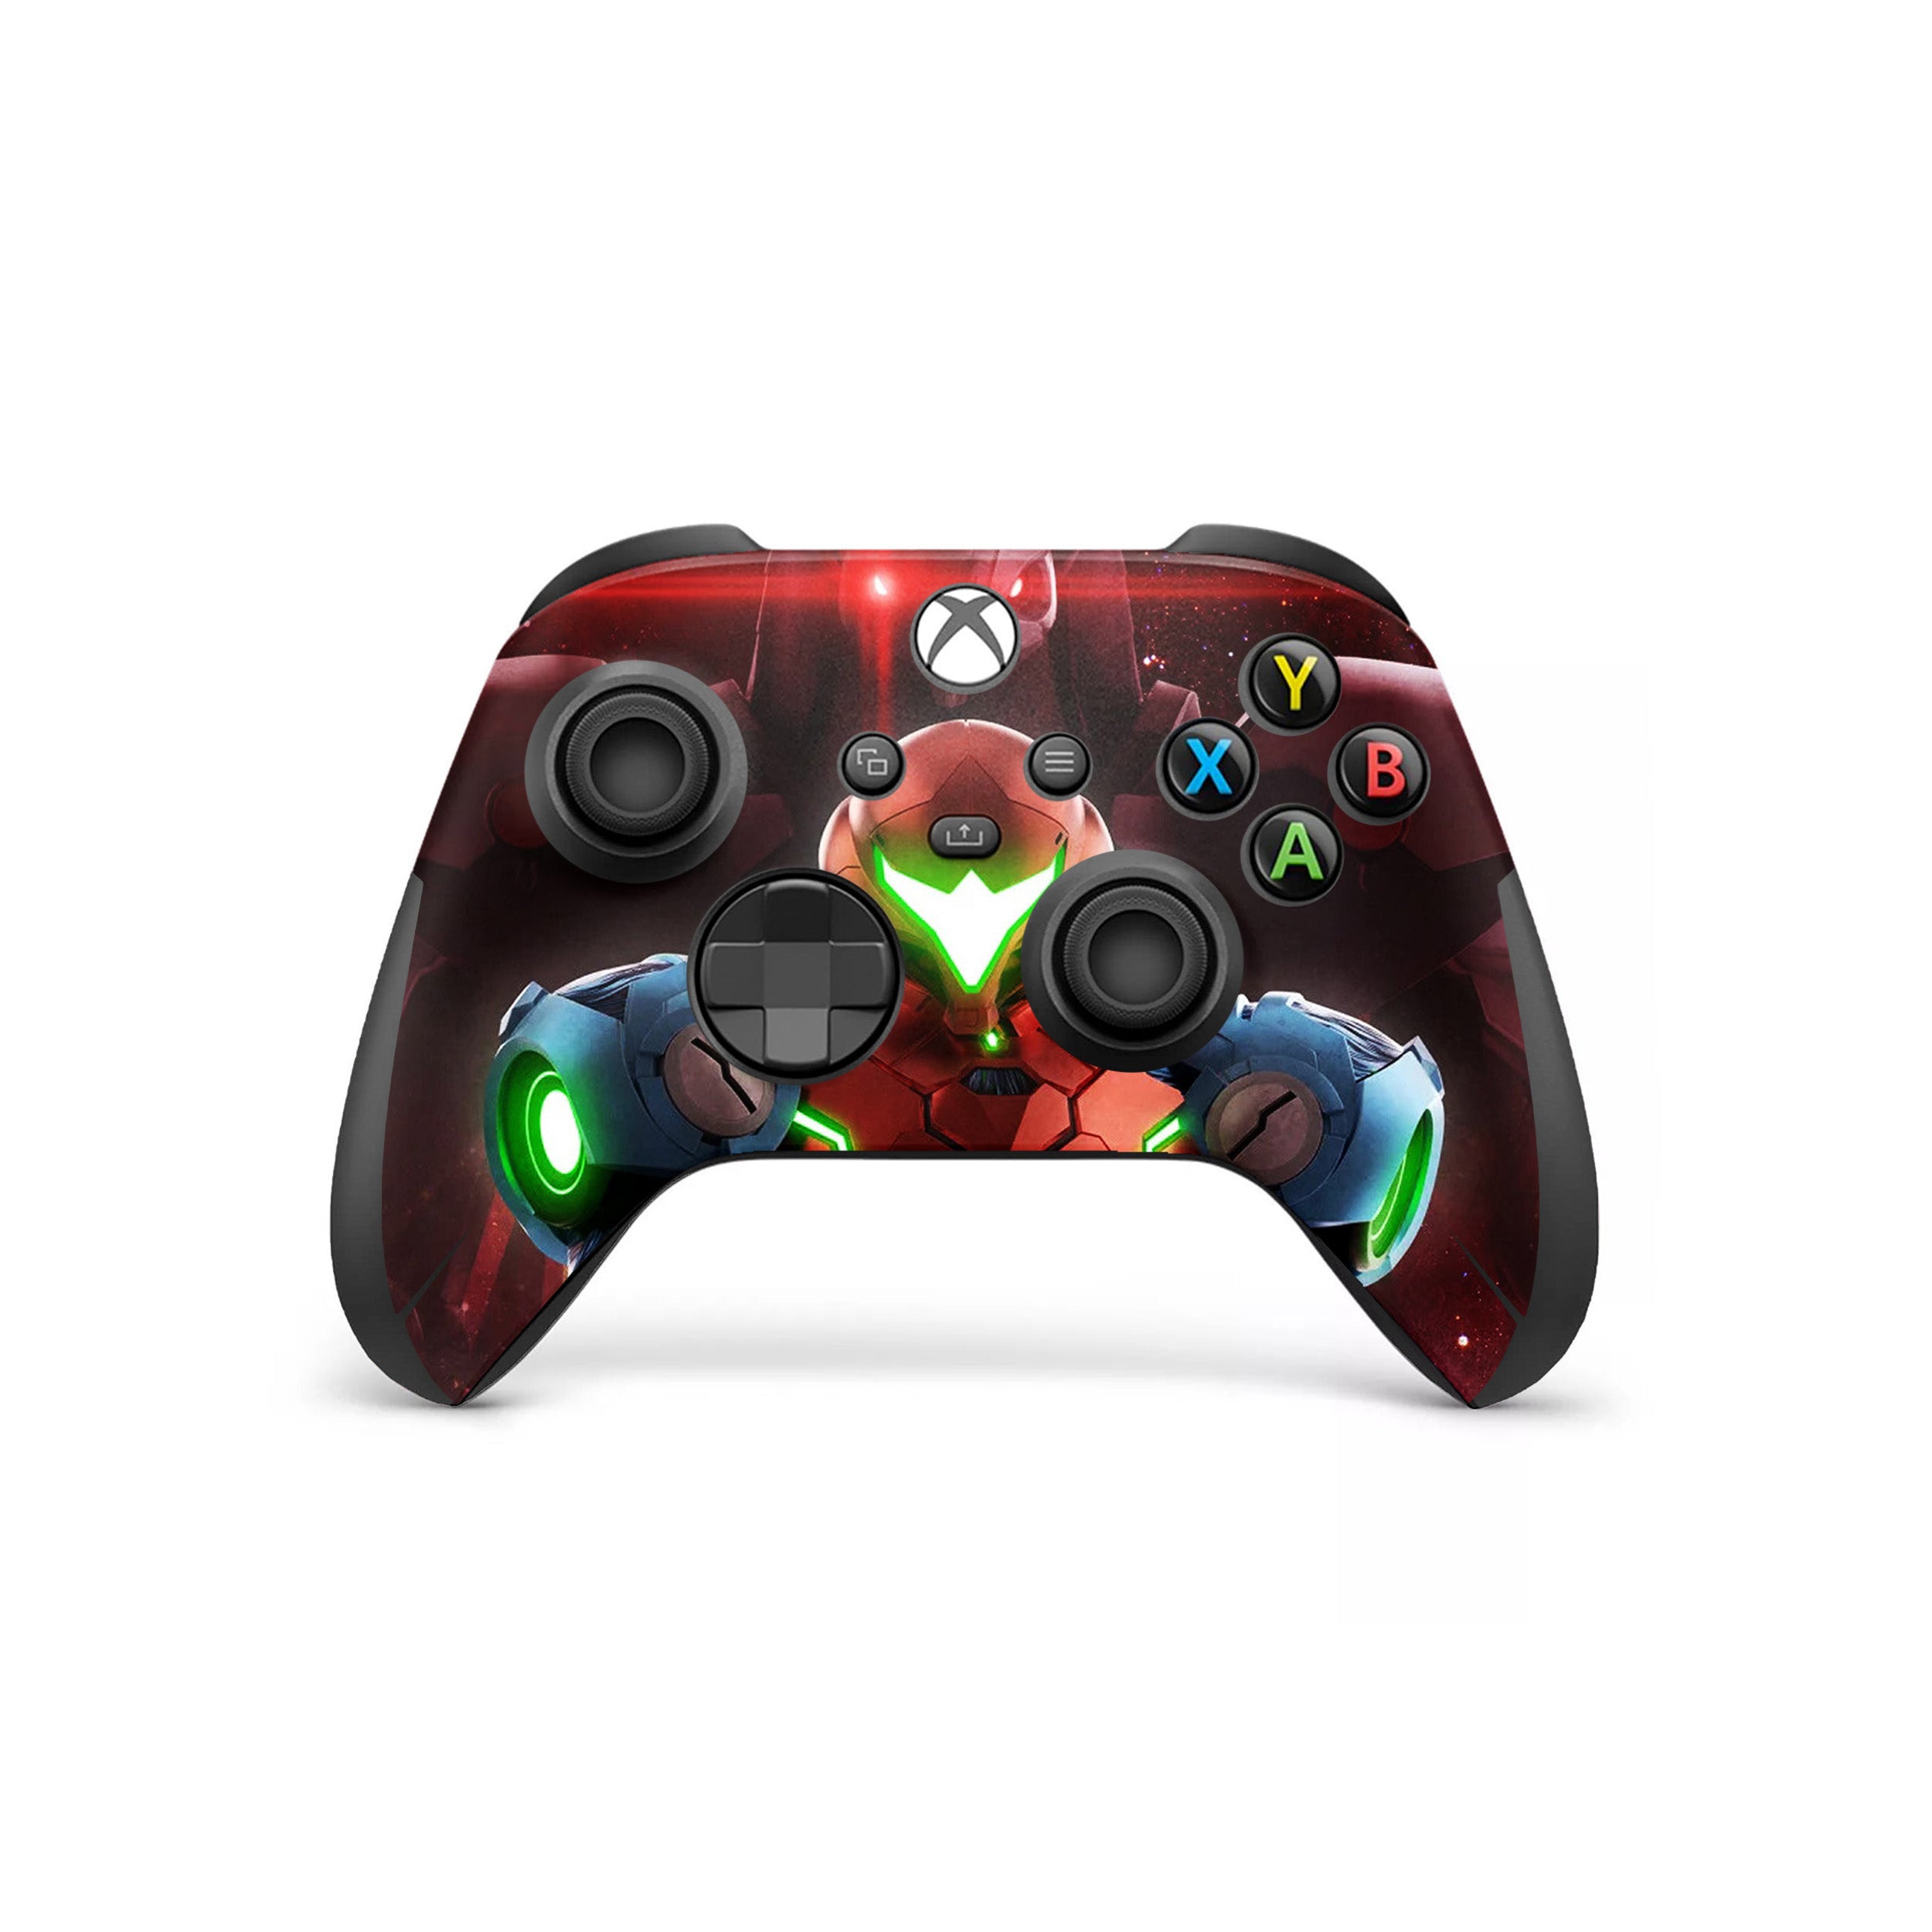 A video game skin featuring a Metroid Dread design for the Xbox Wireless Controller.